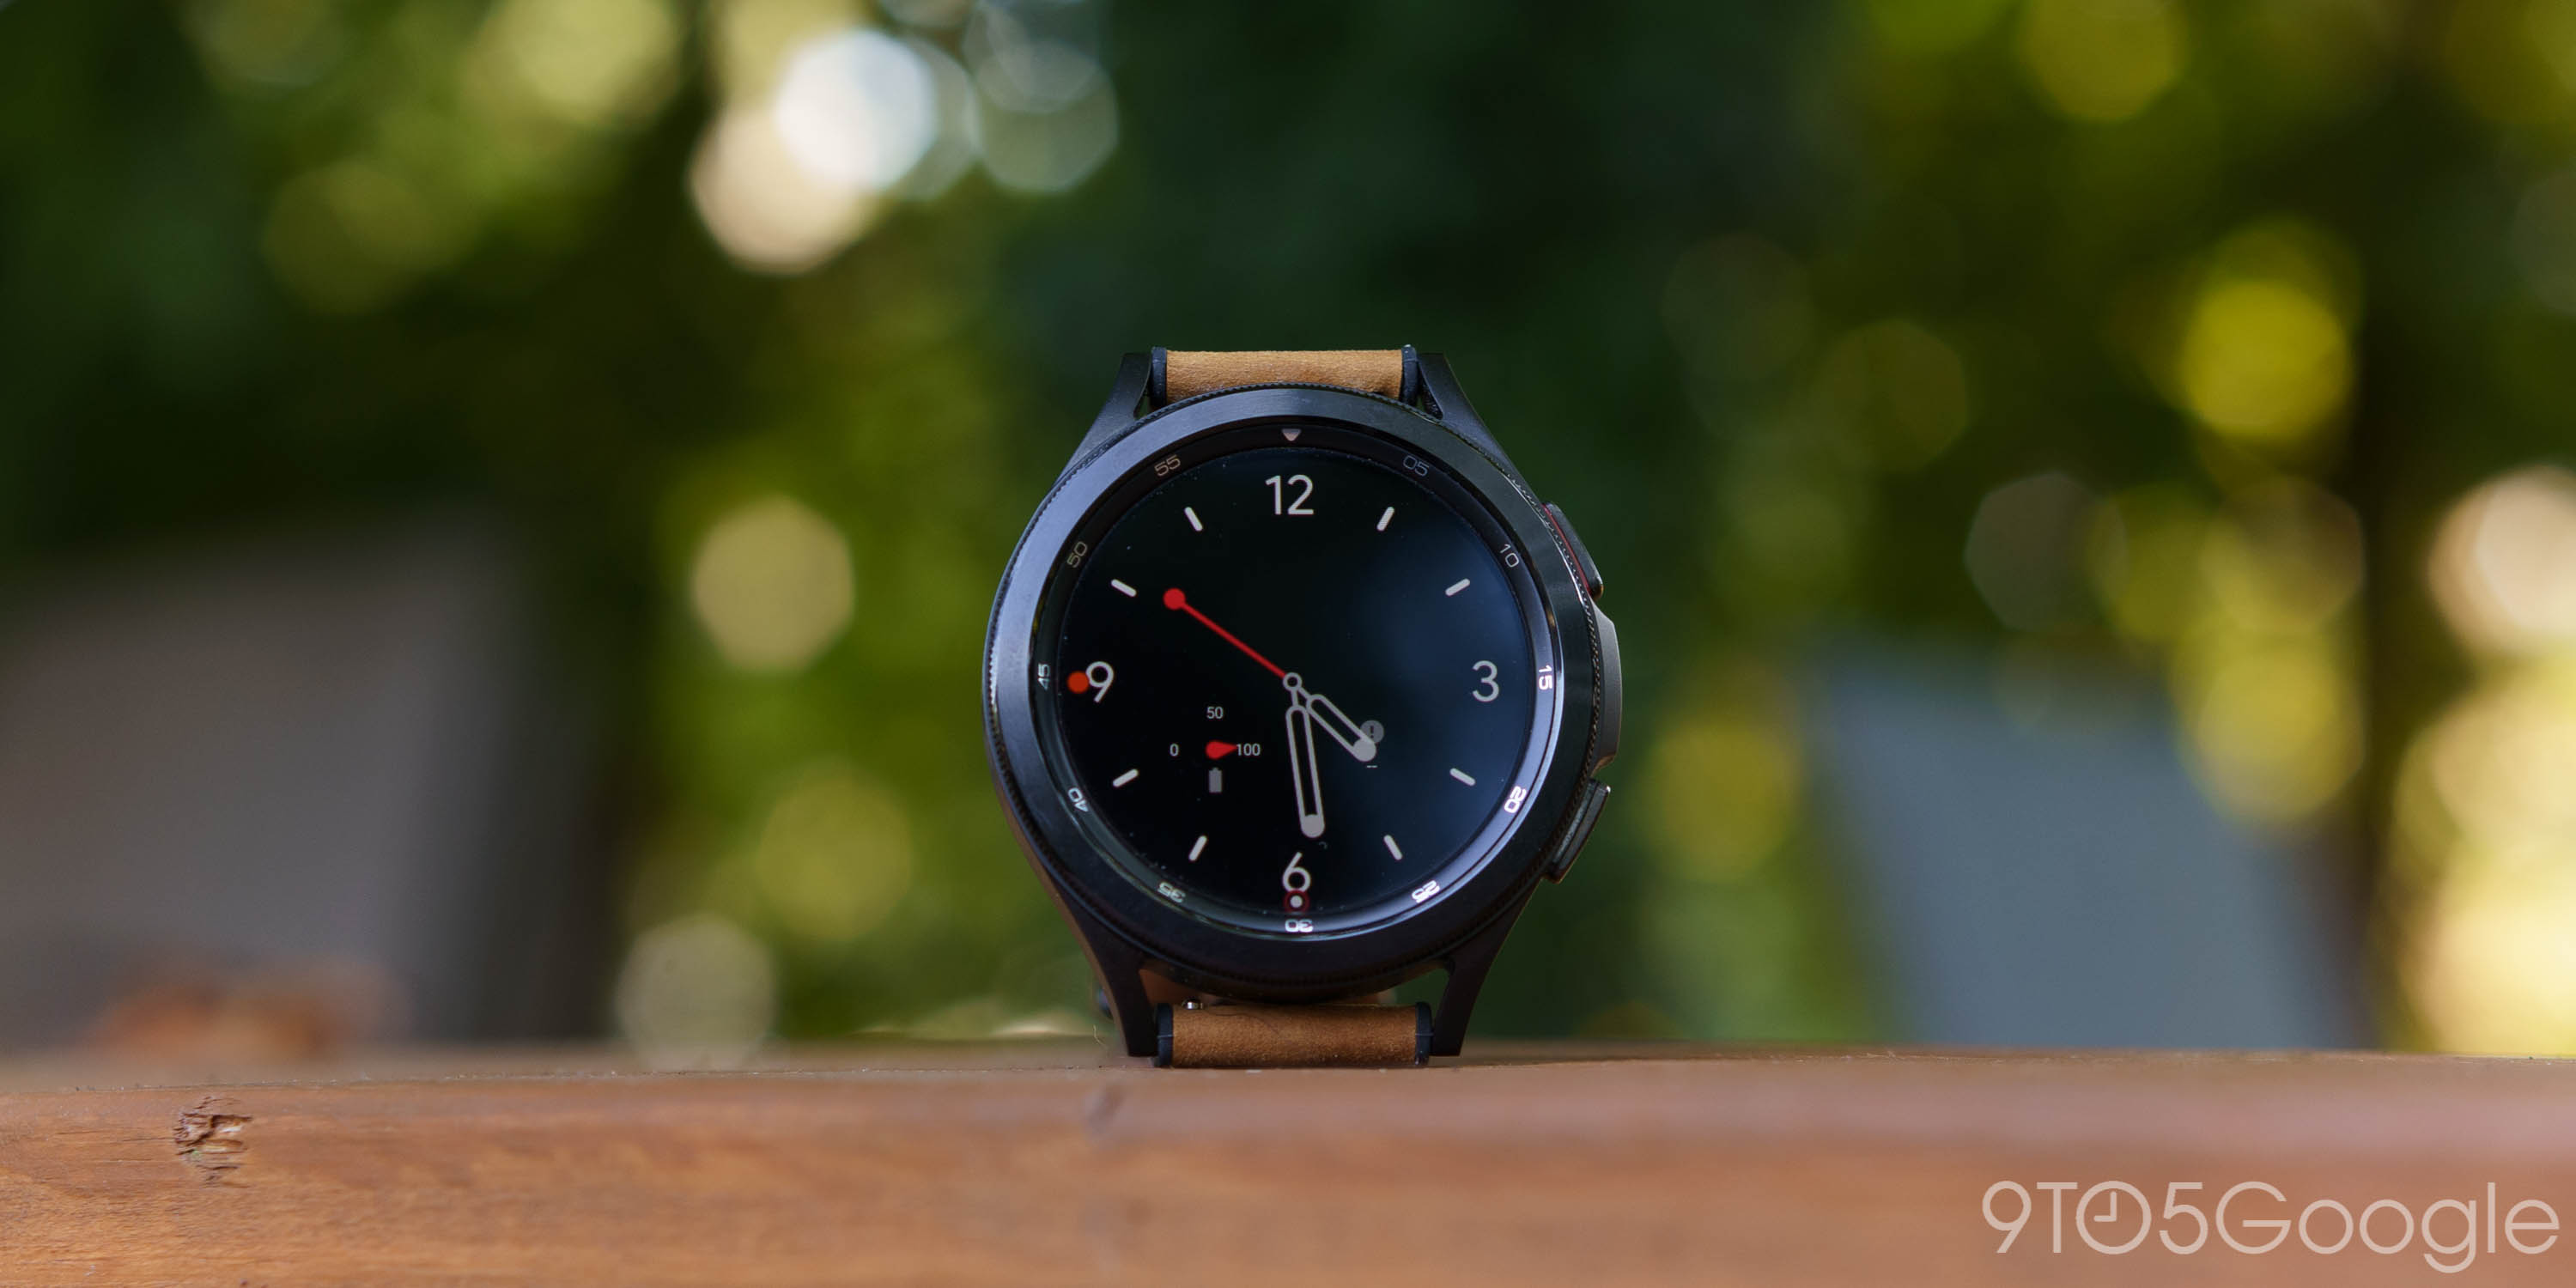 Best Android Smartwatches: Wear OS, Samsung, more - 9to5Google